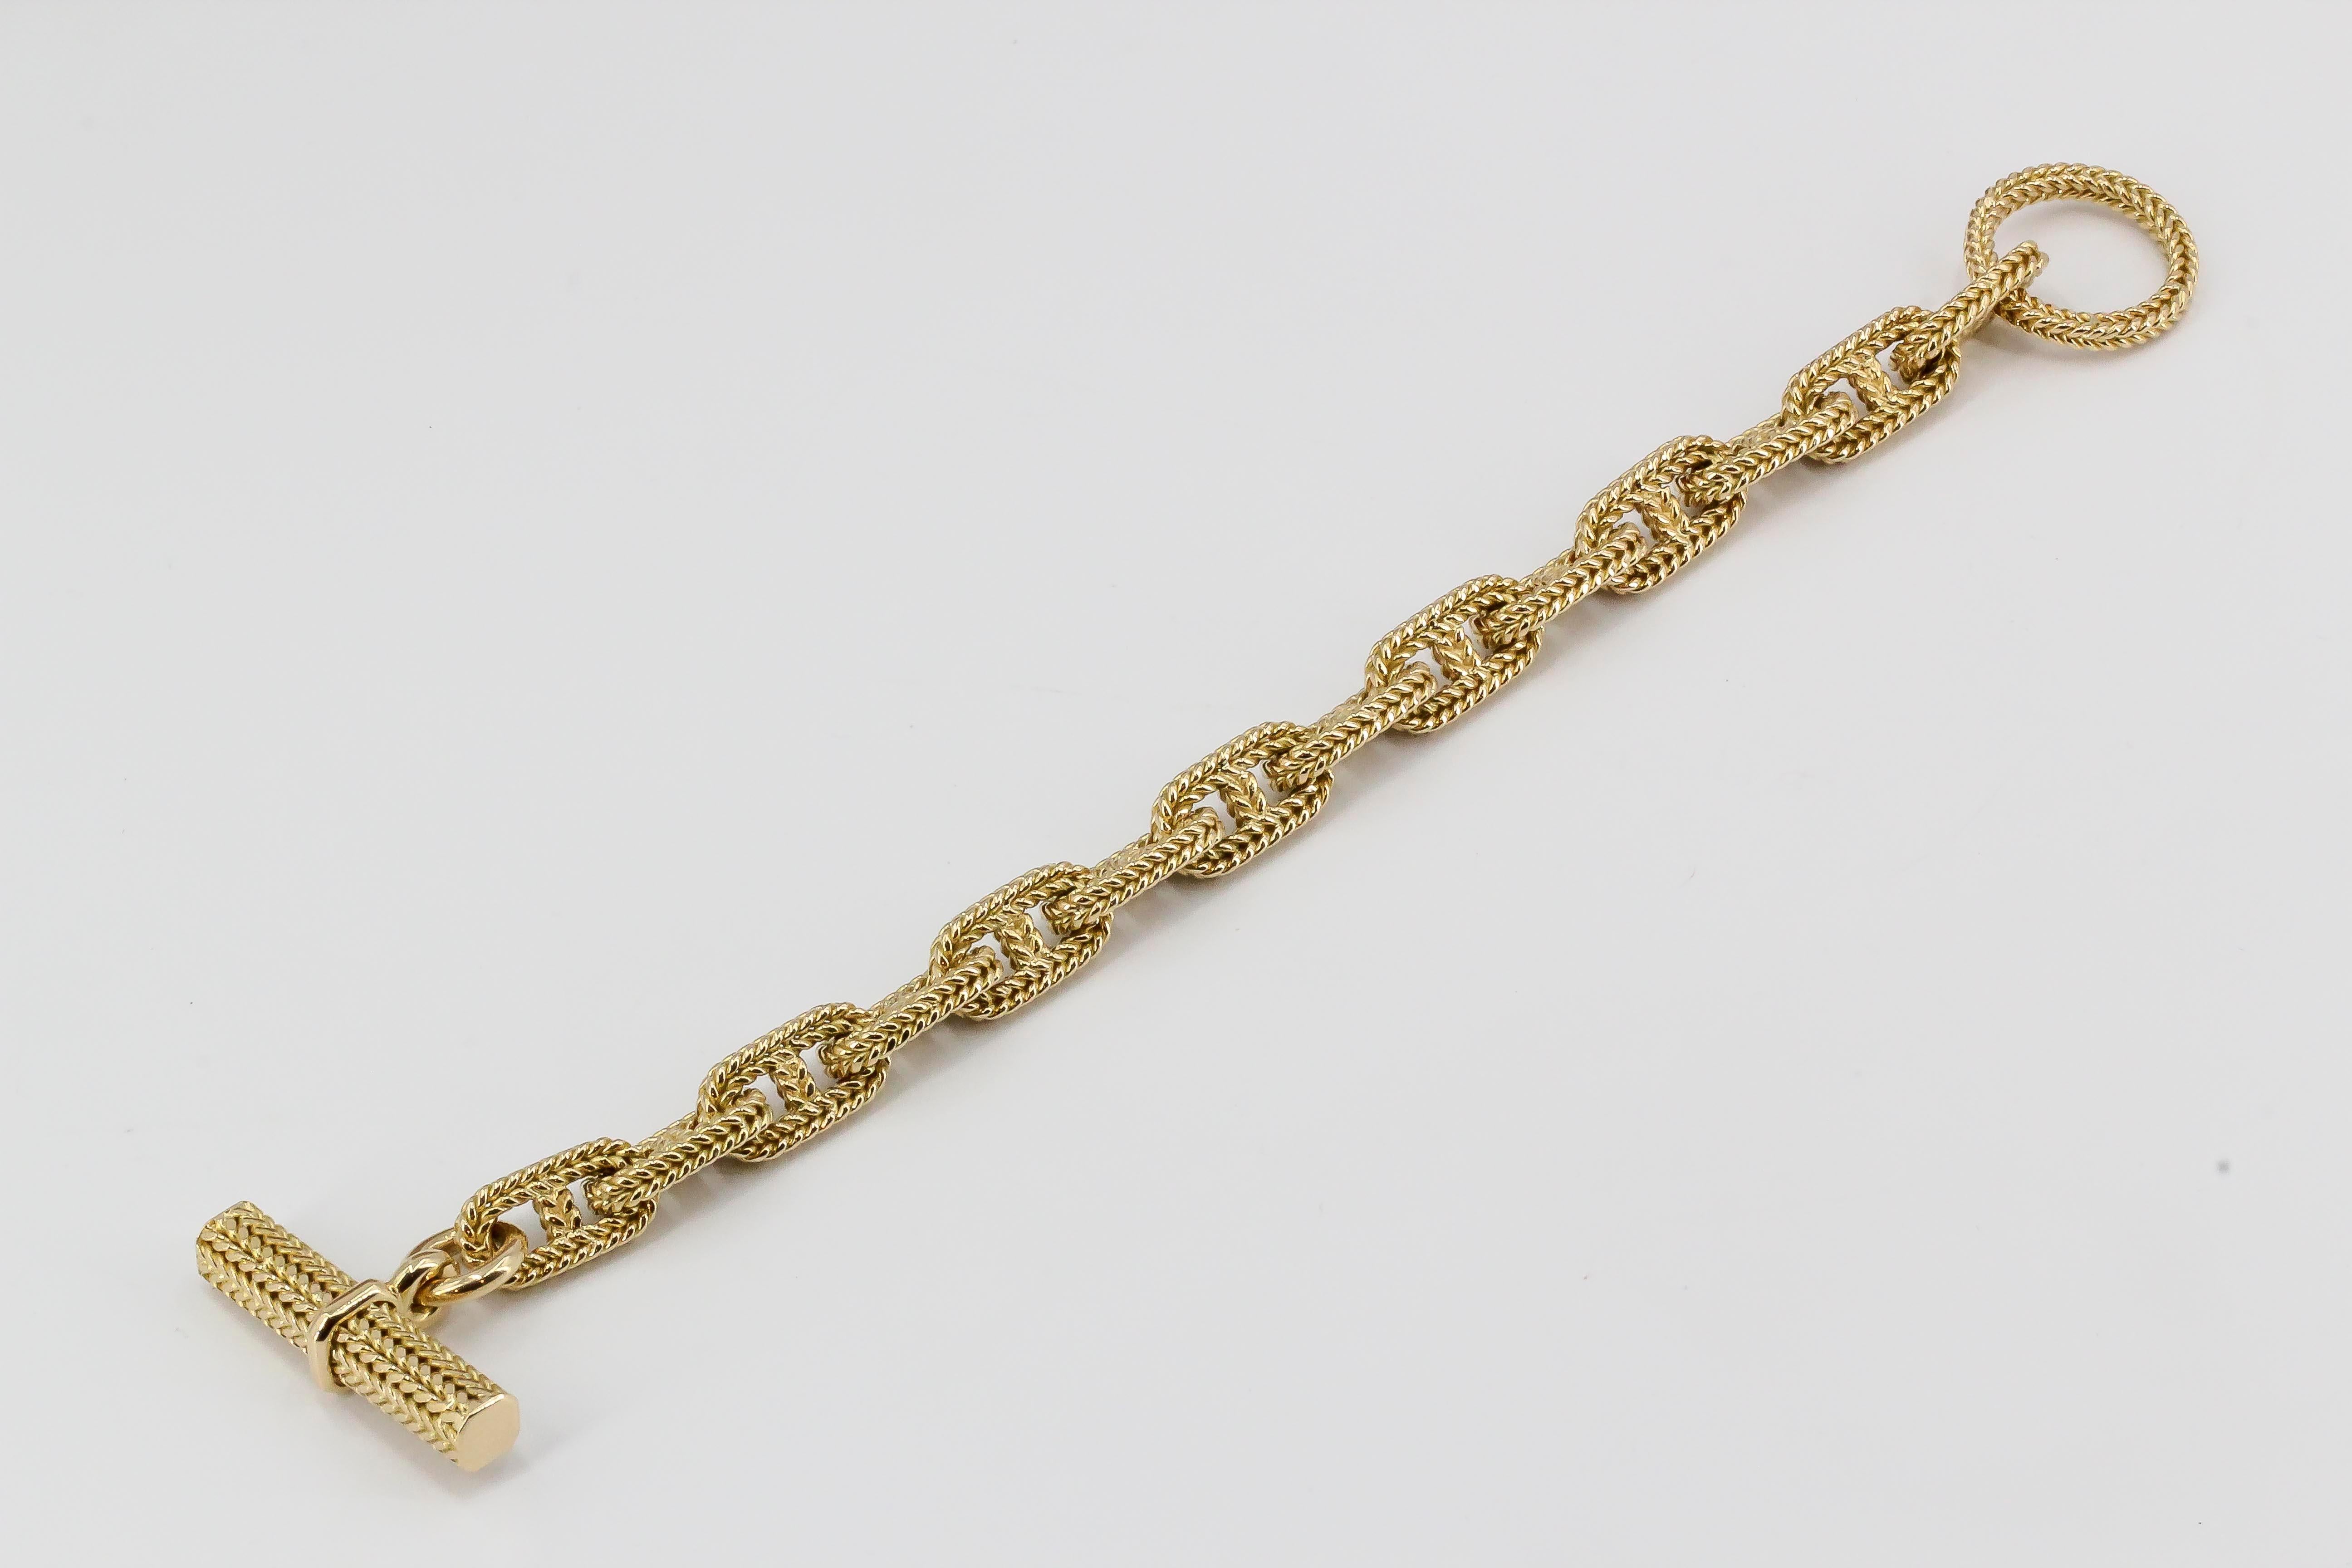 Chic 18K yellow gold link bracelet from the 